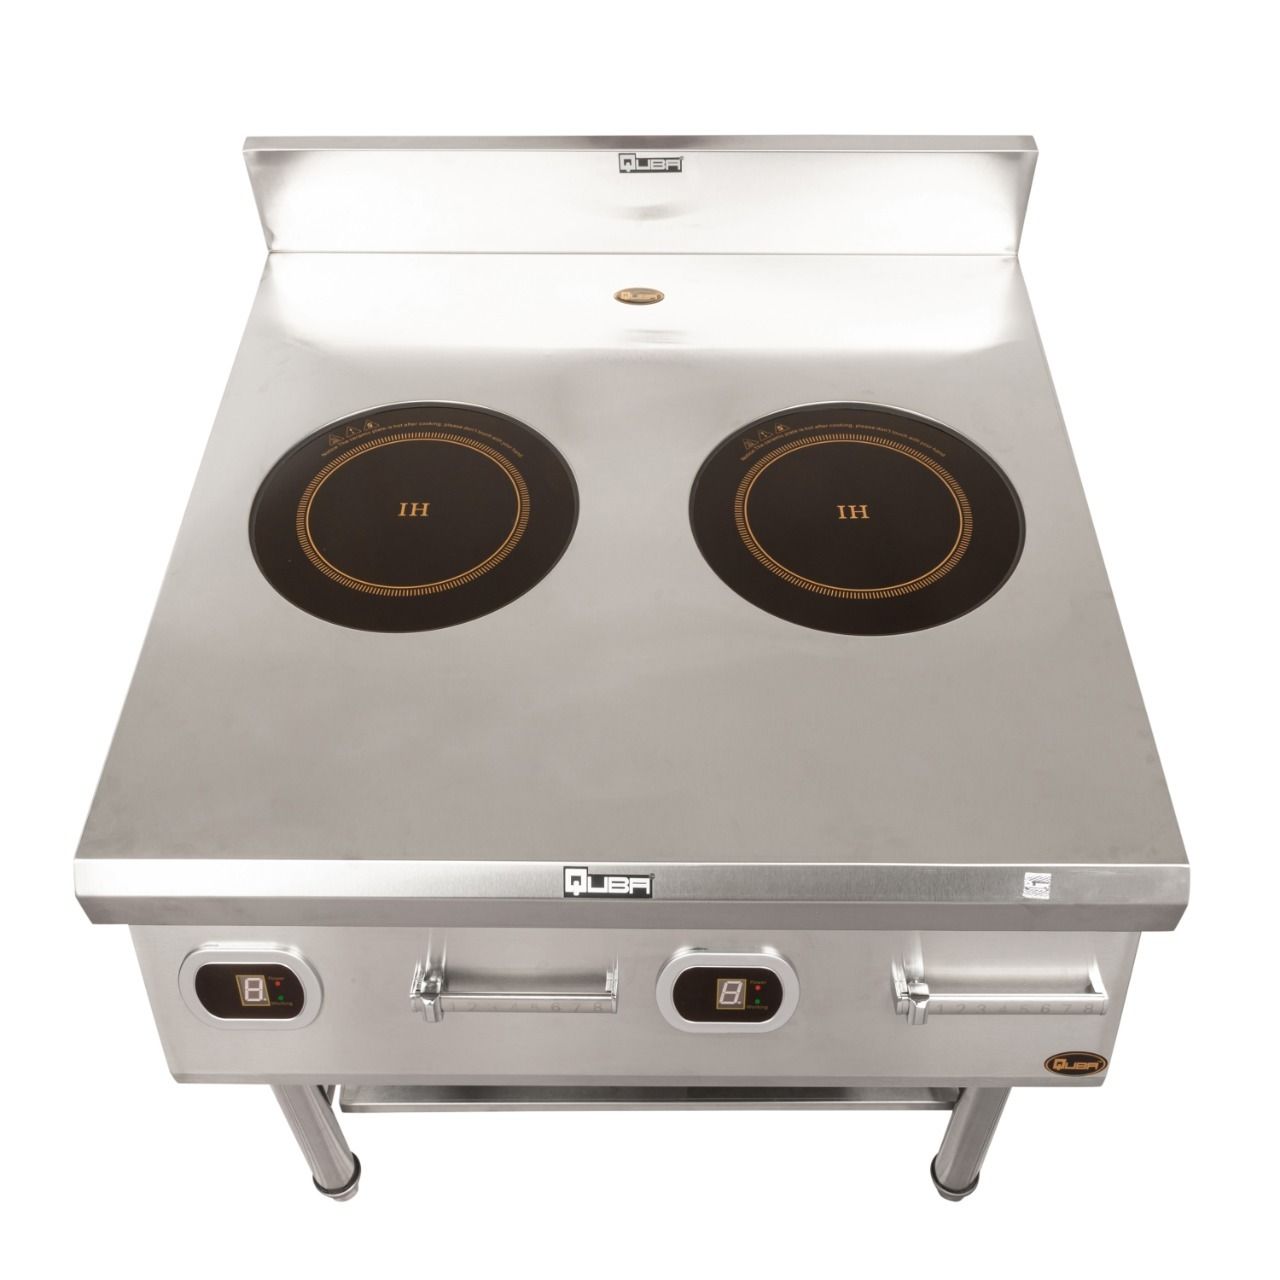 2 BURNERS DOUBLE COMMERCIAL INDUCTION COOKER